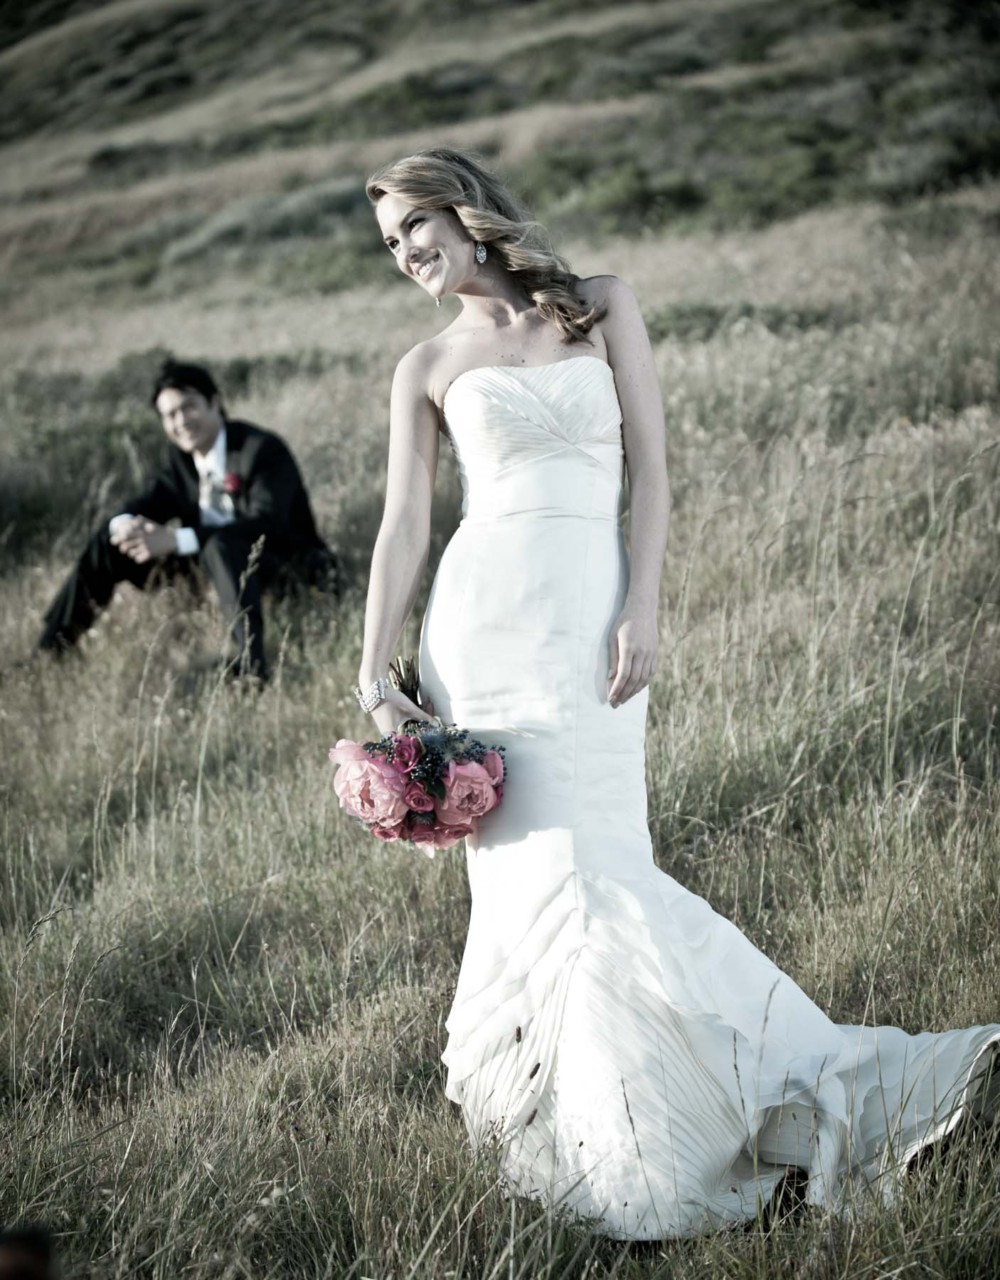 Looking for a creative wedding photographer in Big Lake?